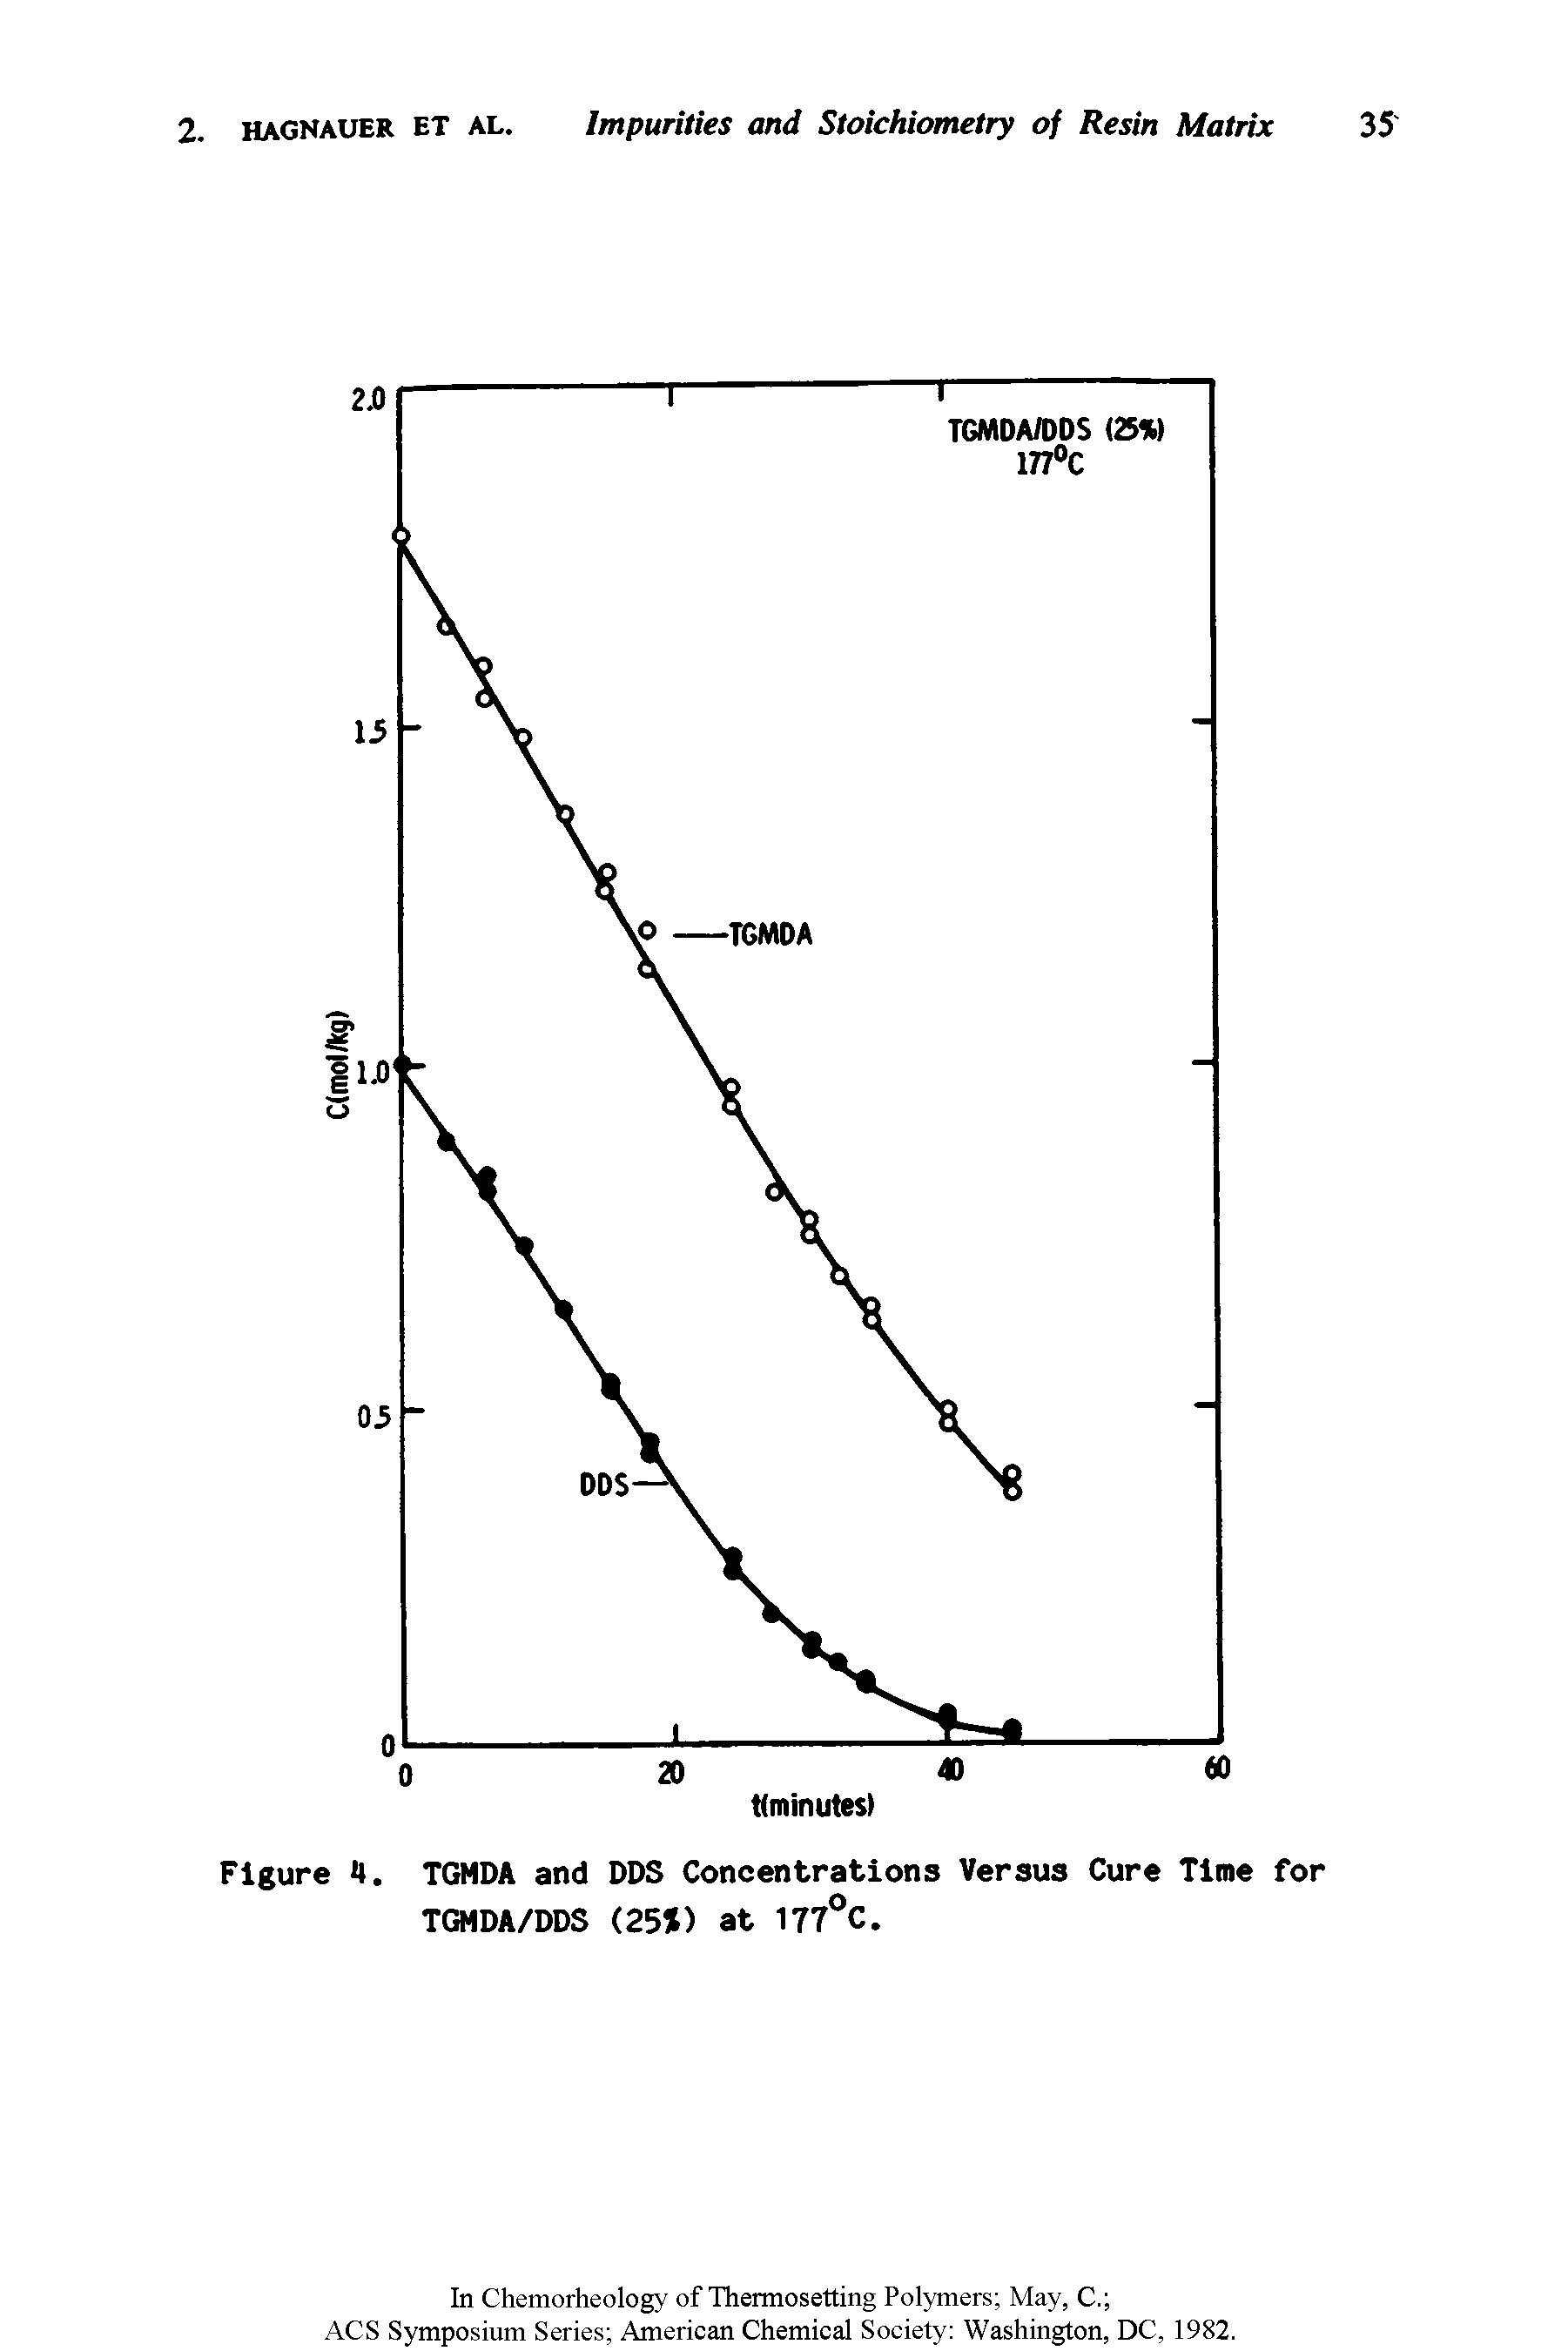 Figure 4. TGMDA and DDS Concentrations Versus Cure Time for TGMDA/DDS (25t) at 177°C.